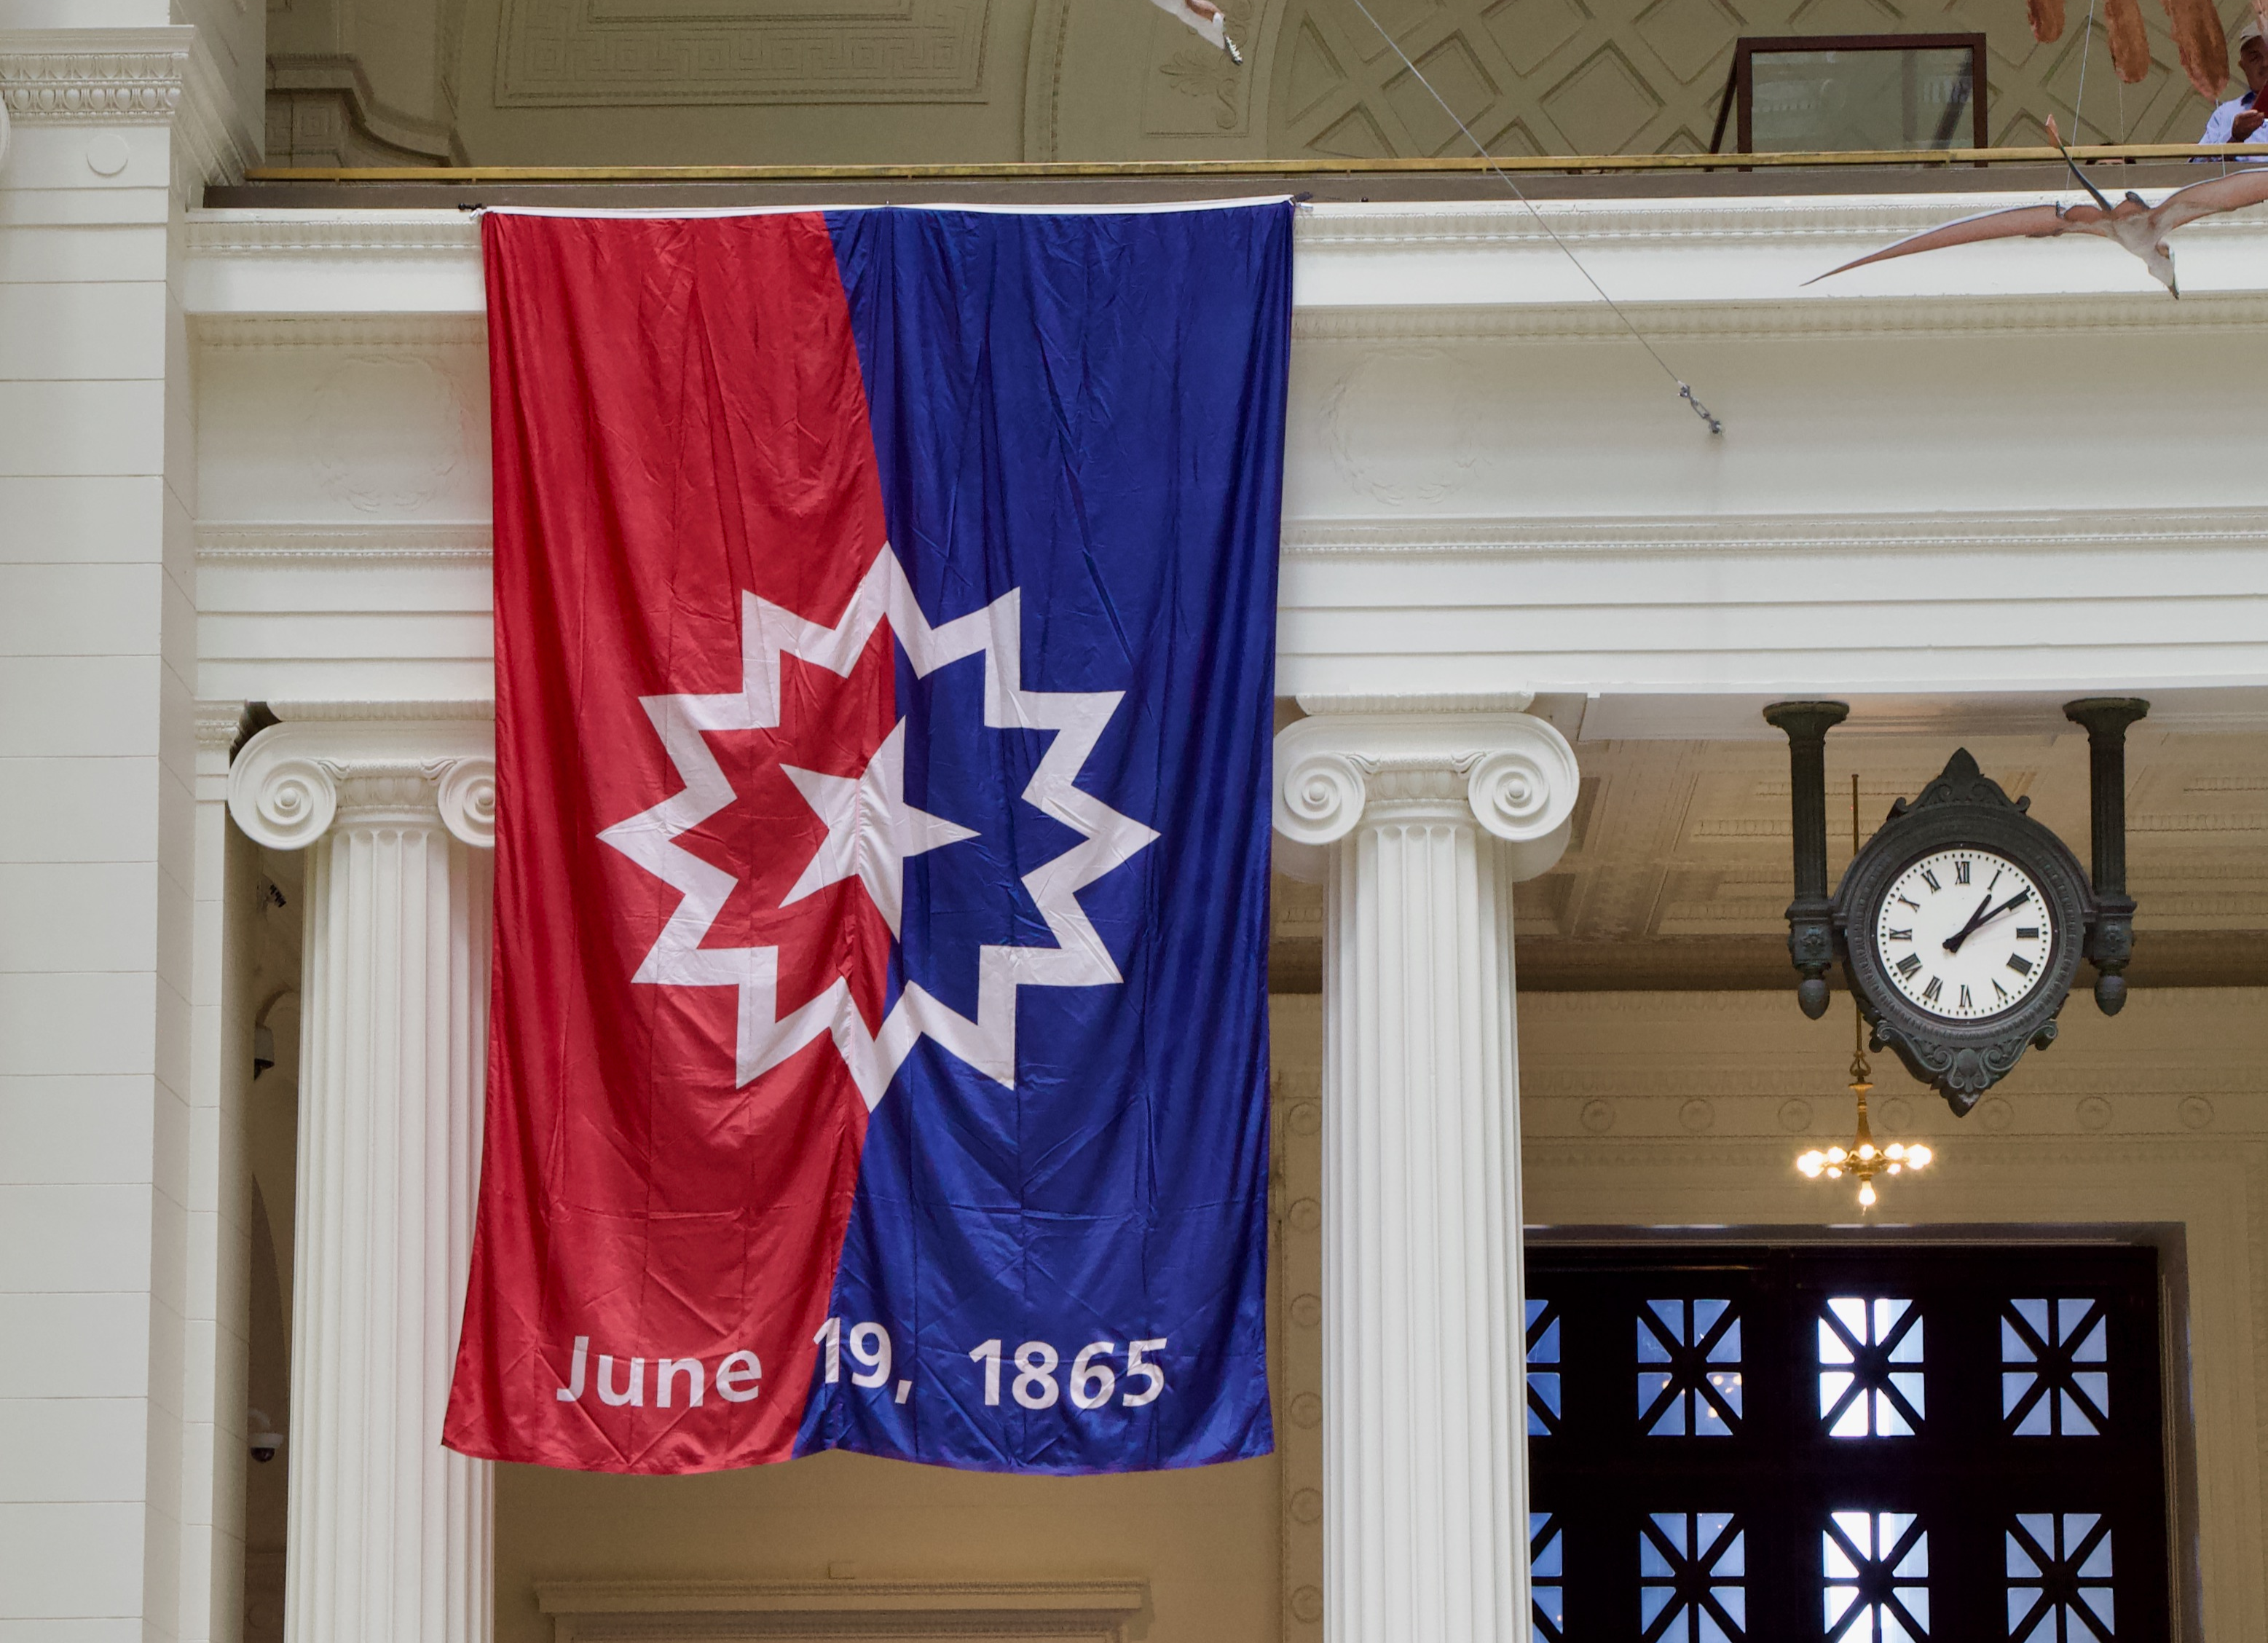 The Juneteenth flag hanging from a balcony, a clock nearby